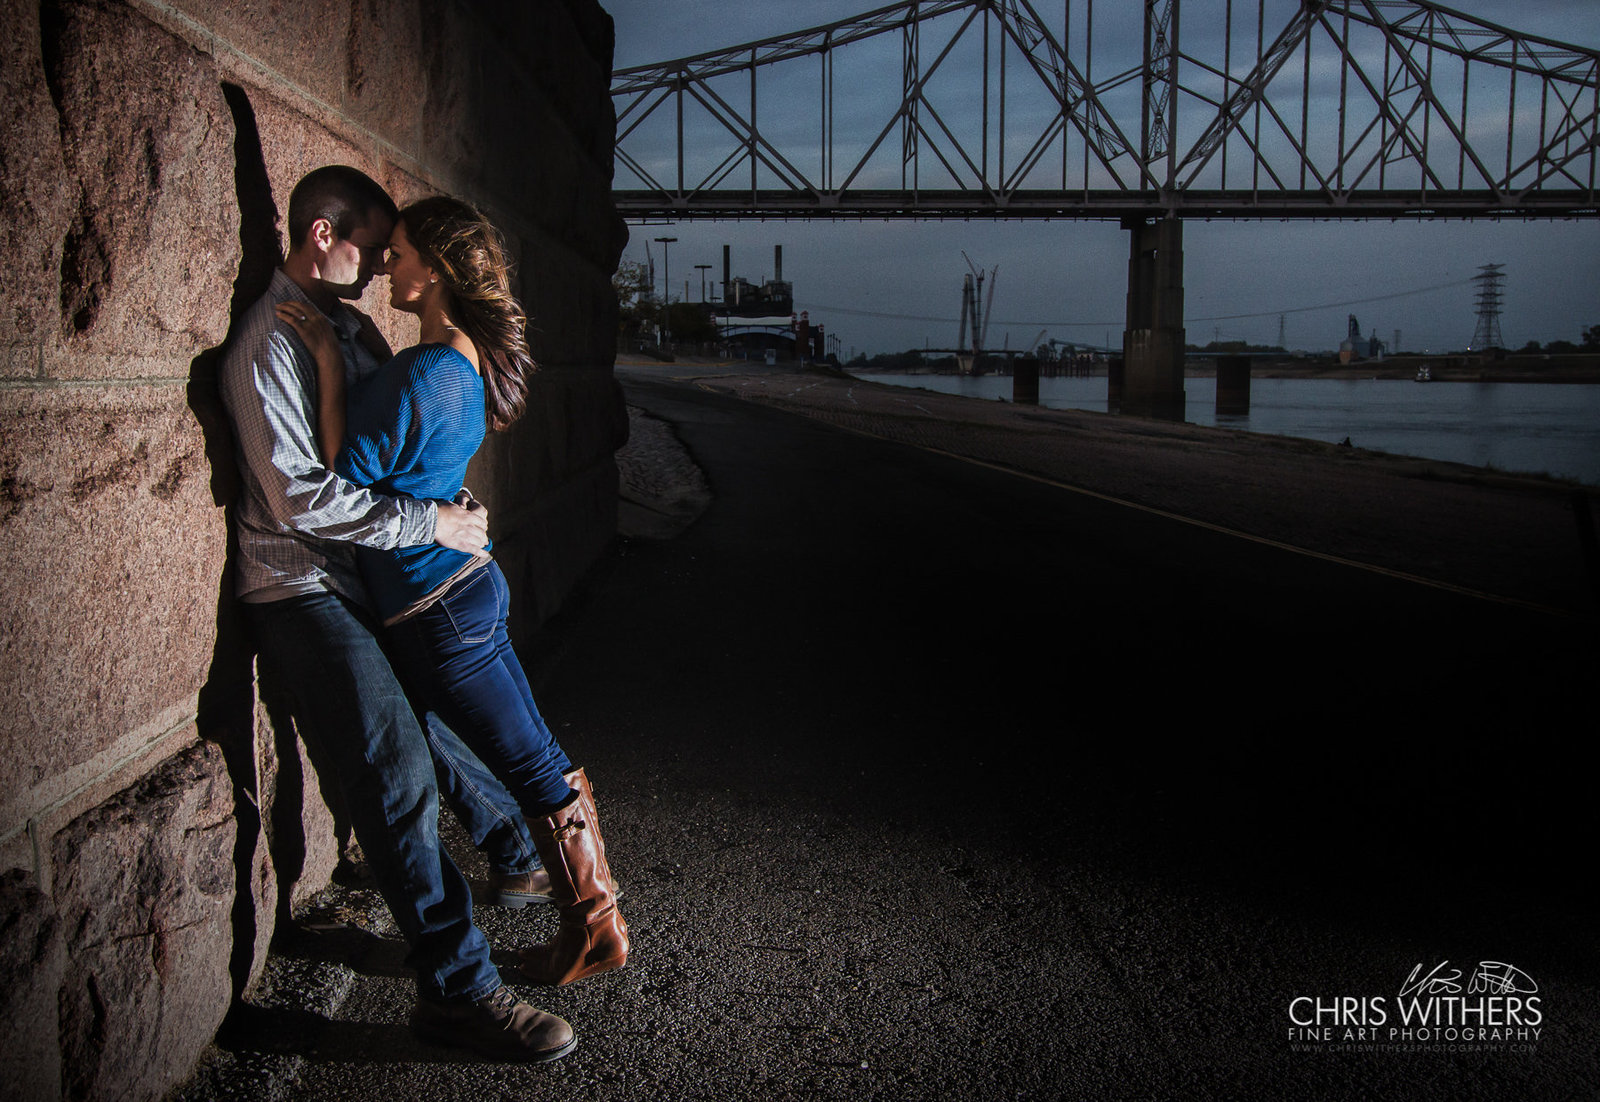 Springfield Illinois Wedding Photographer - Chris Withers Photography (8 of 159)